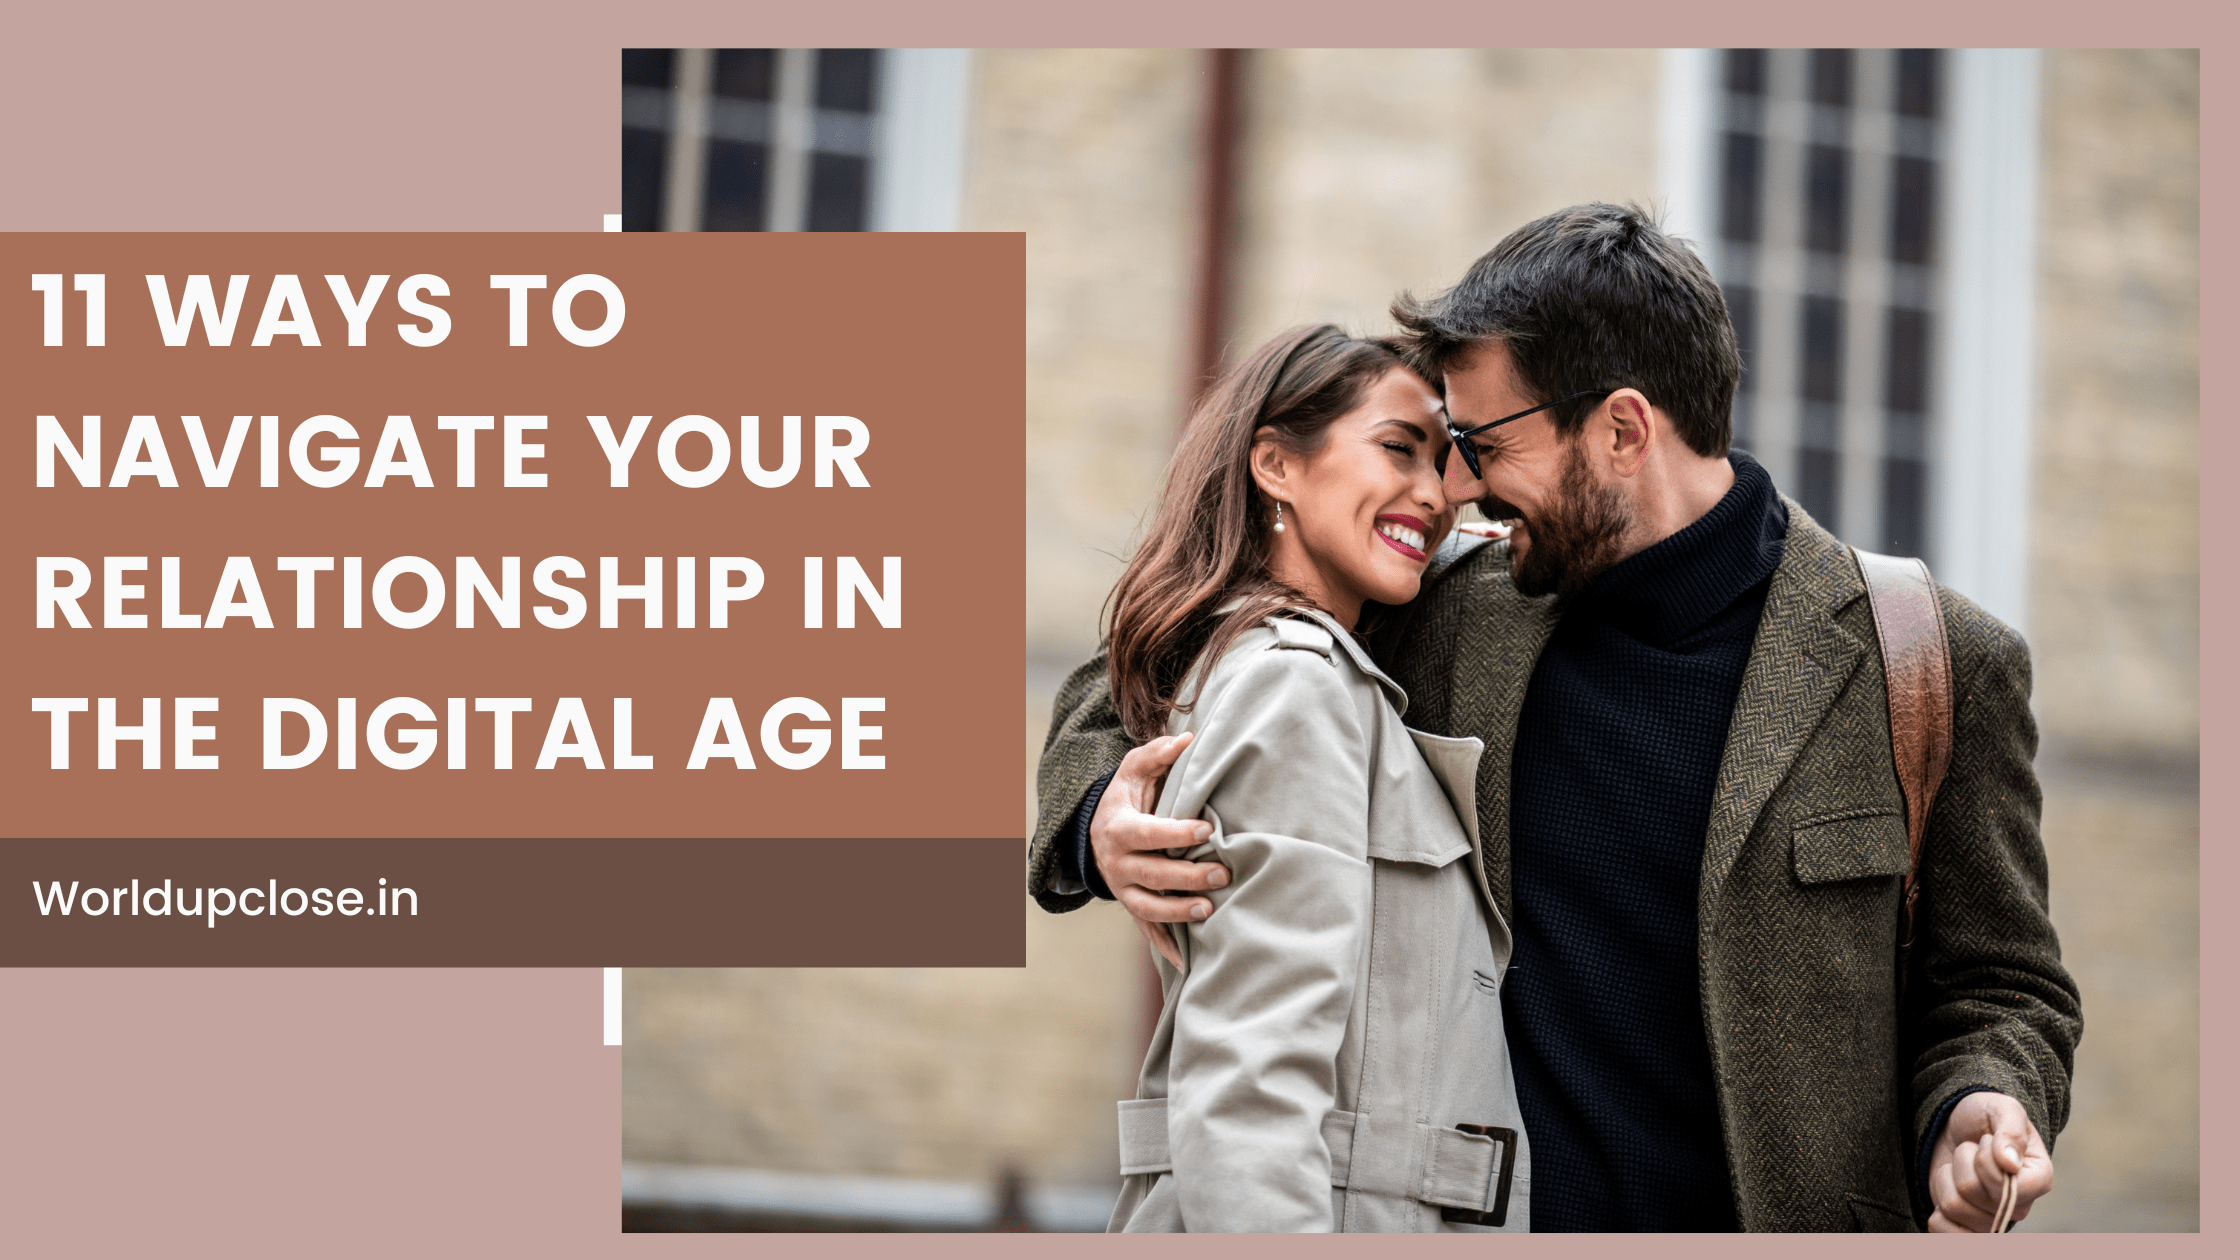 11 Ways to navigate your relationship in the digital age 28